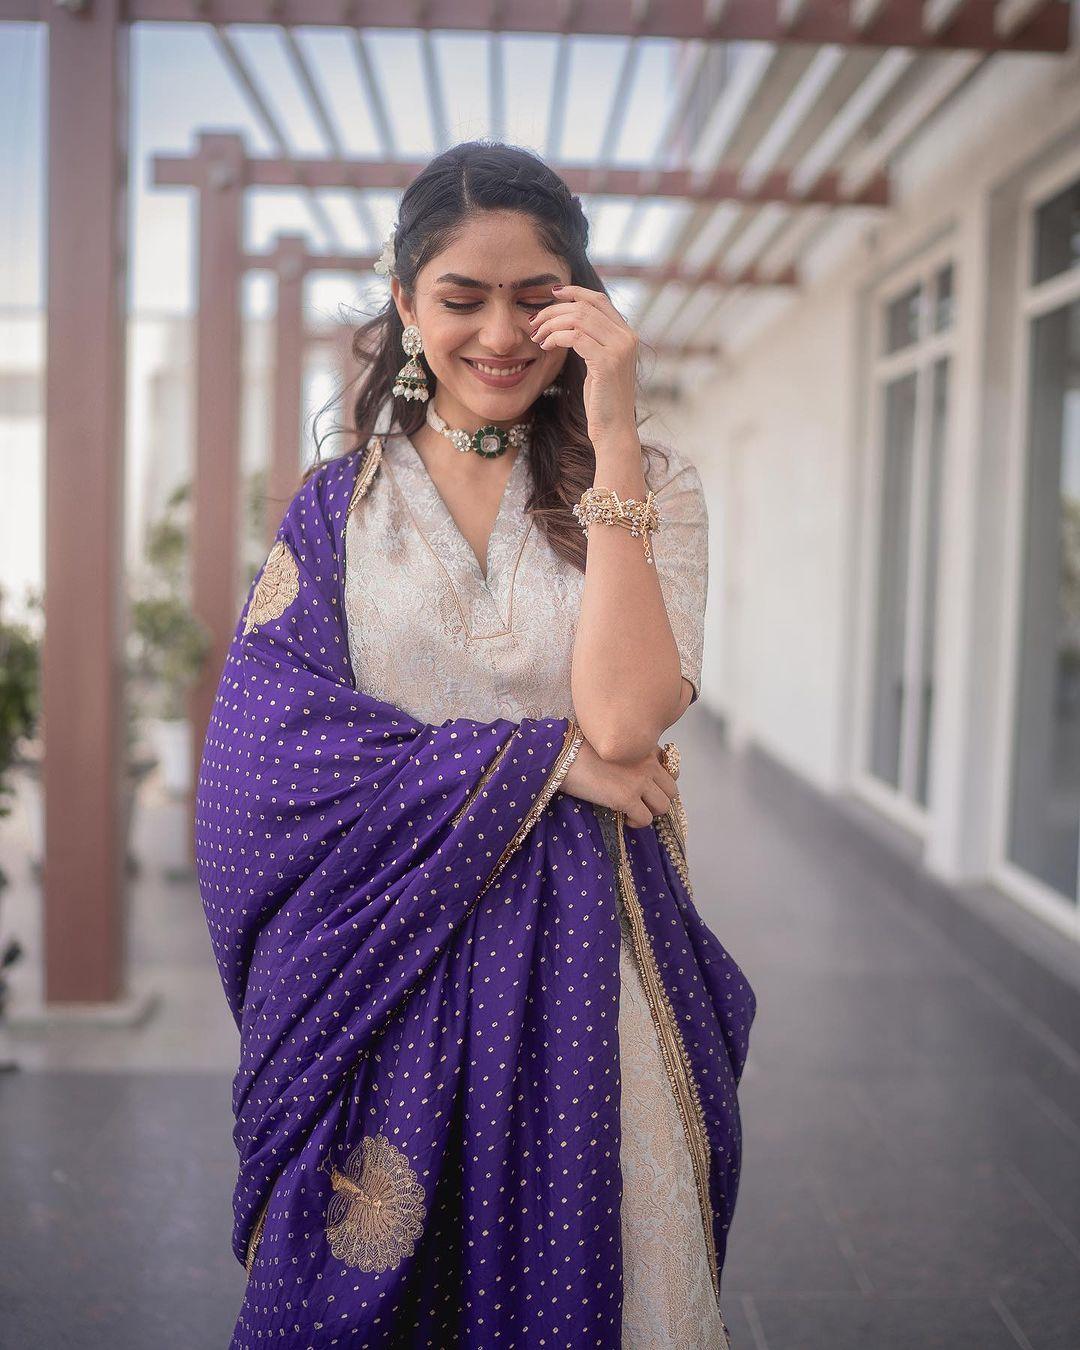  A striking contrast is added by her captivating purple transparent dupatta adorned with intricate designs and golden thread work, breaking the monotony beautifully.